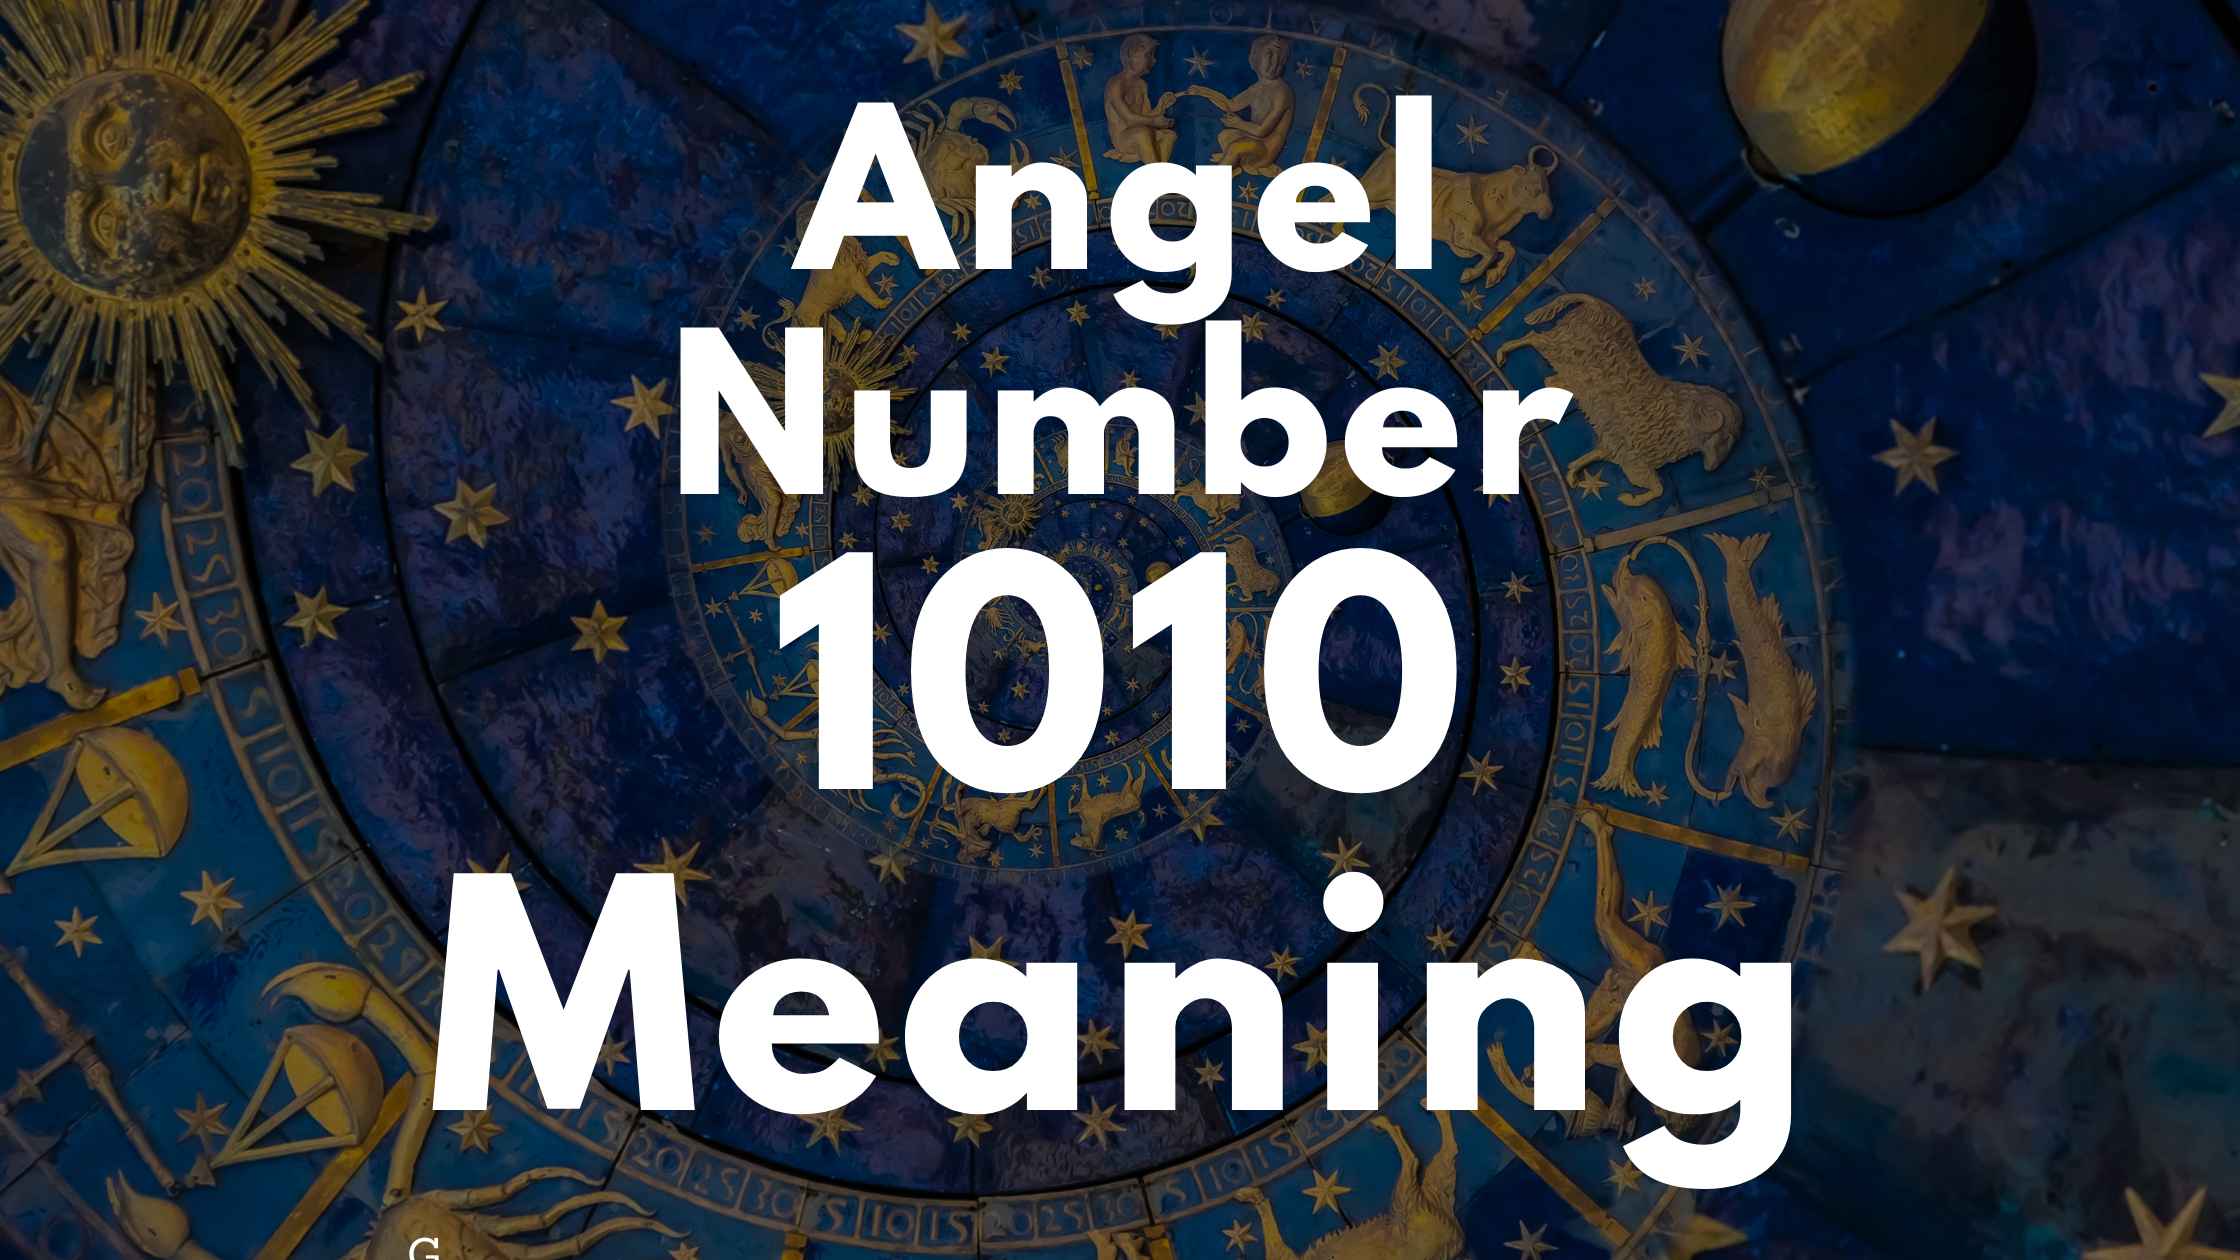 Angel Number 1010 Spiritual Meaning, Symbolism, and Significance